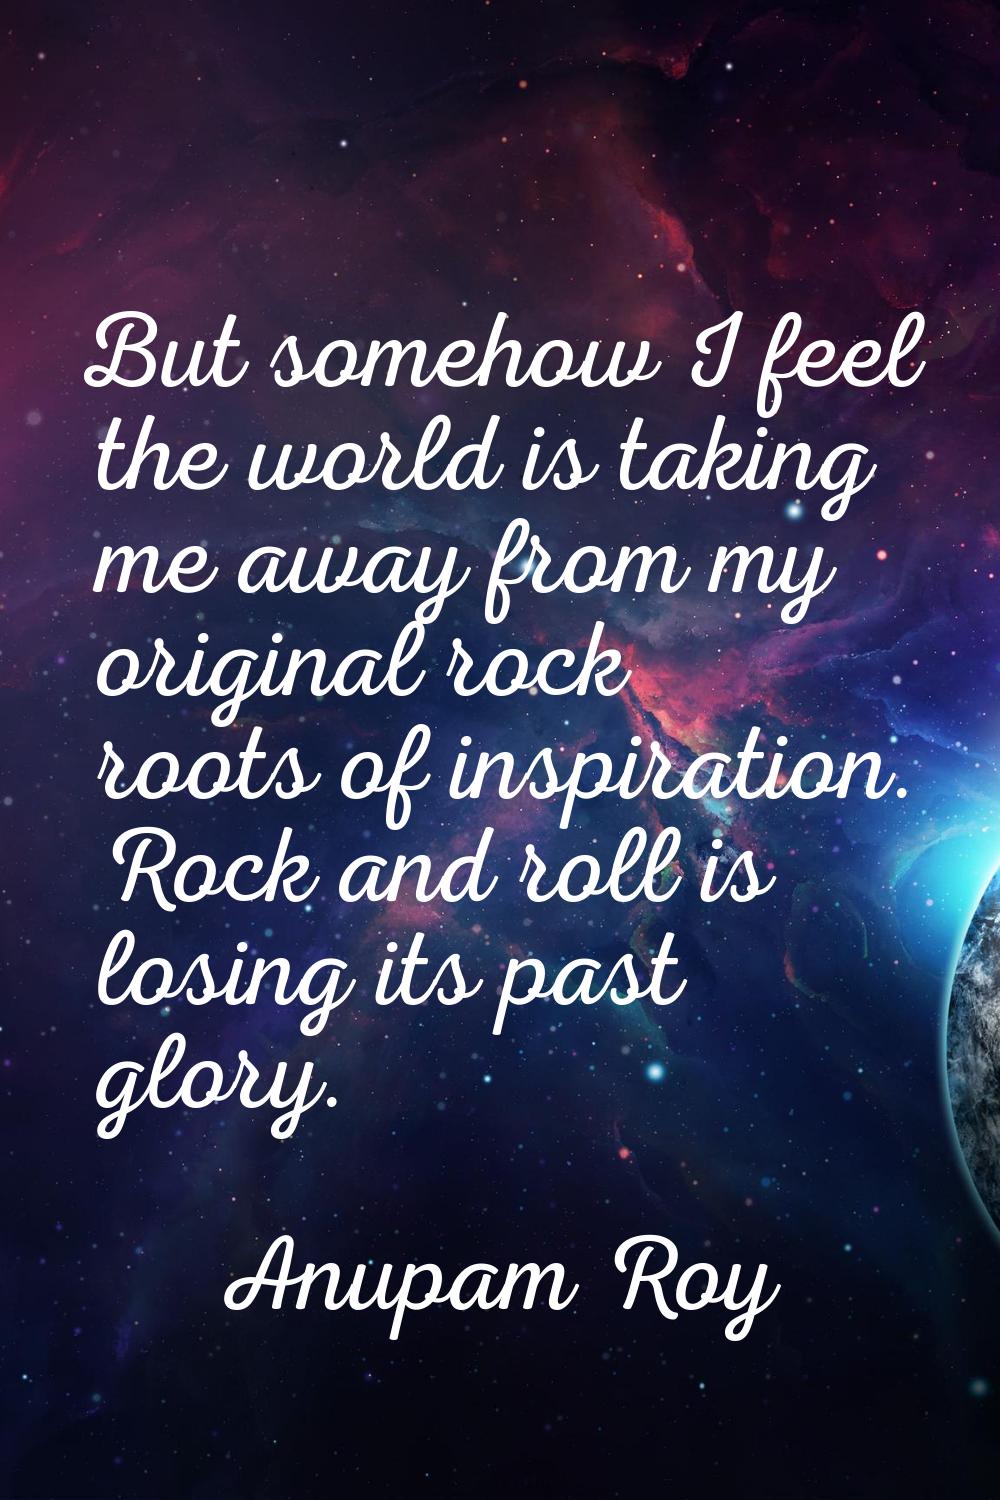 But somehow I feel the world is taking me away from my original rock roots of inspiration. Rock and